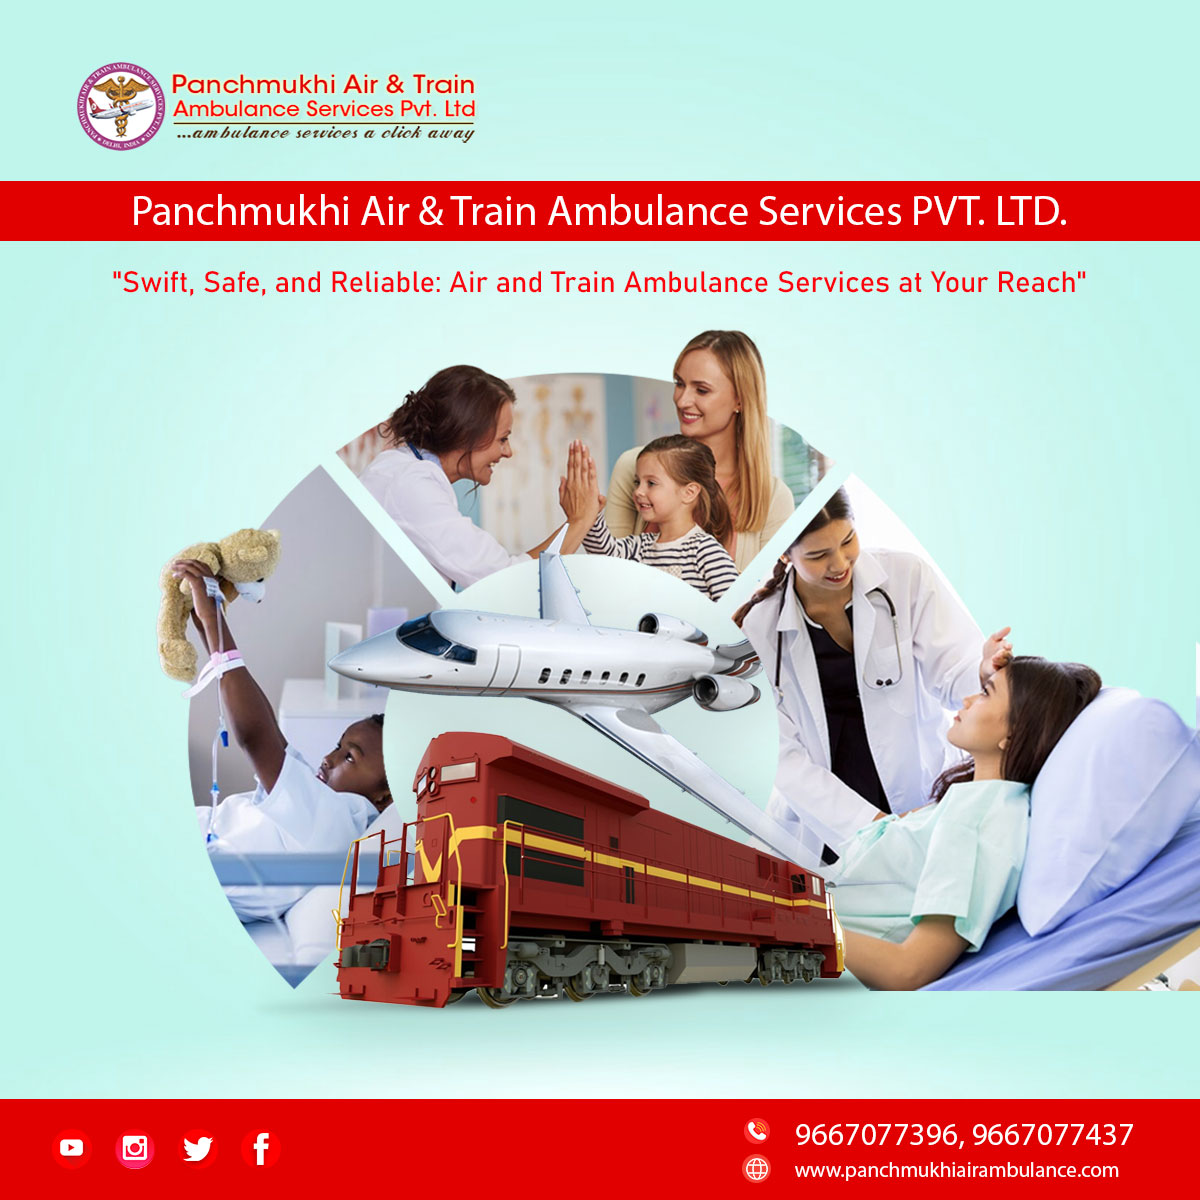 Panchmukhi Air and Train Ambulance Service in Guwahati is Known for Being Available 24/7